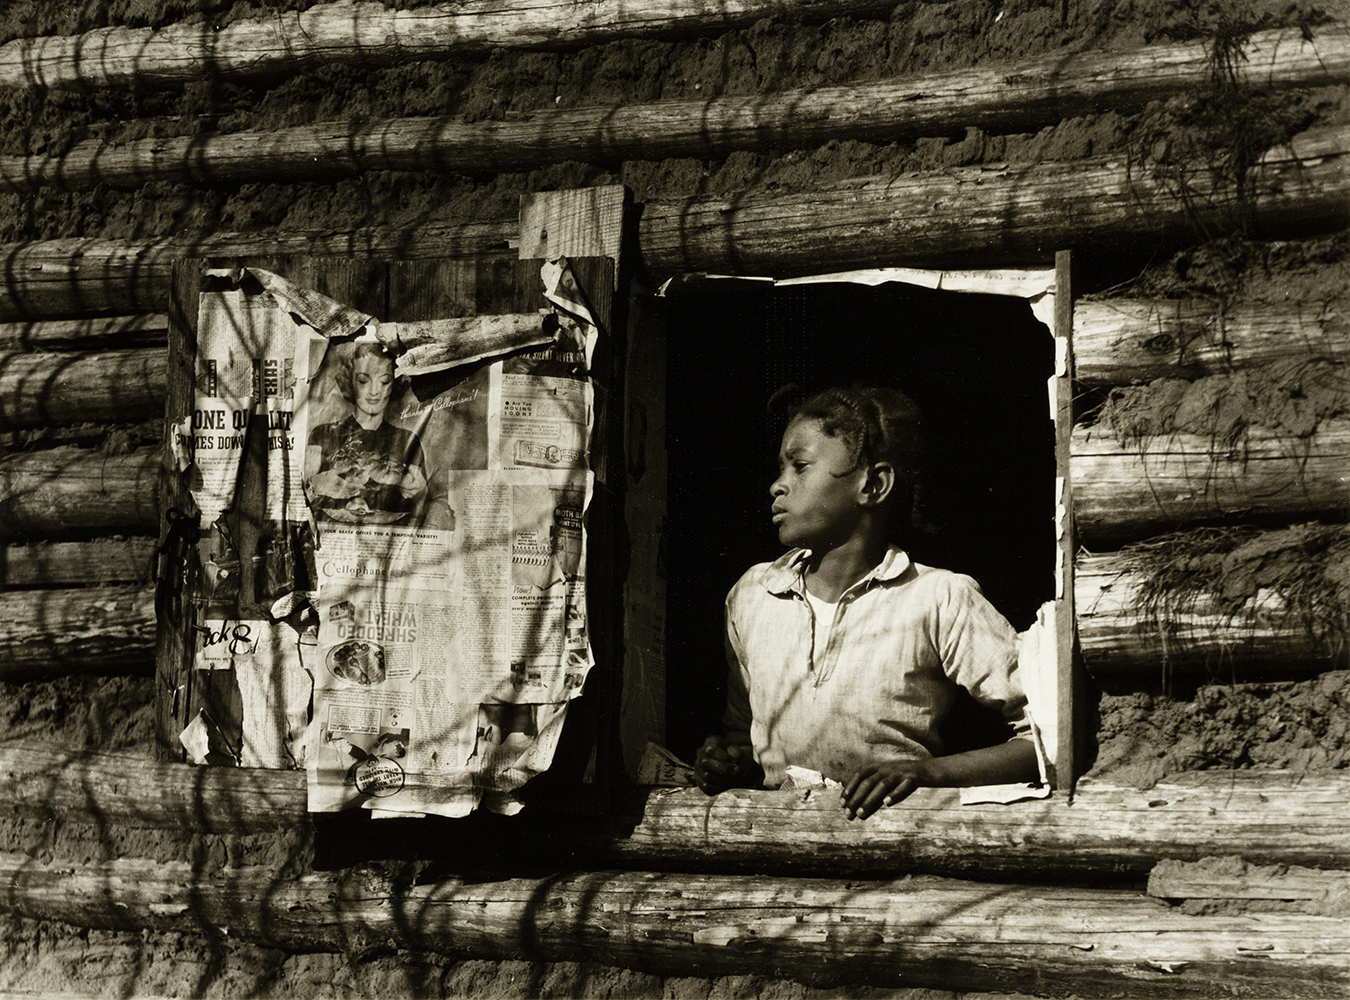 Photograph of a young Black girl staring out of an open window of a log home. The interior of the window door and home contain layers of newspaper on the walls